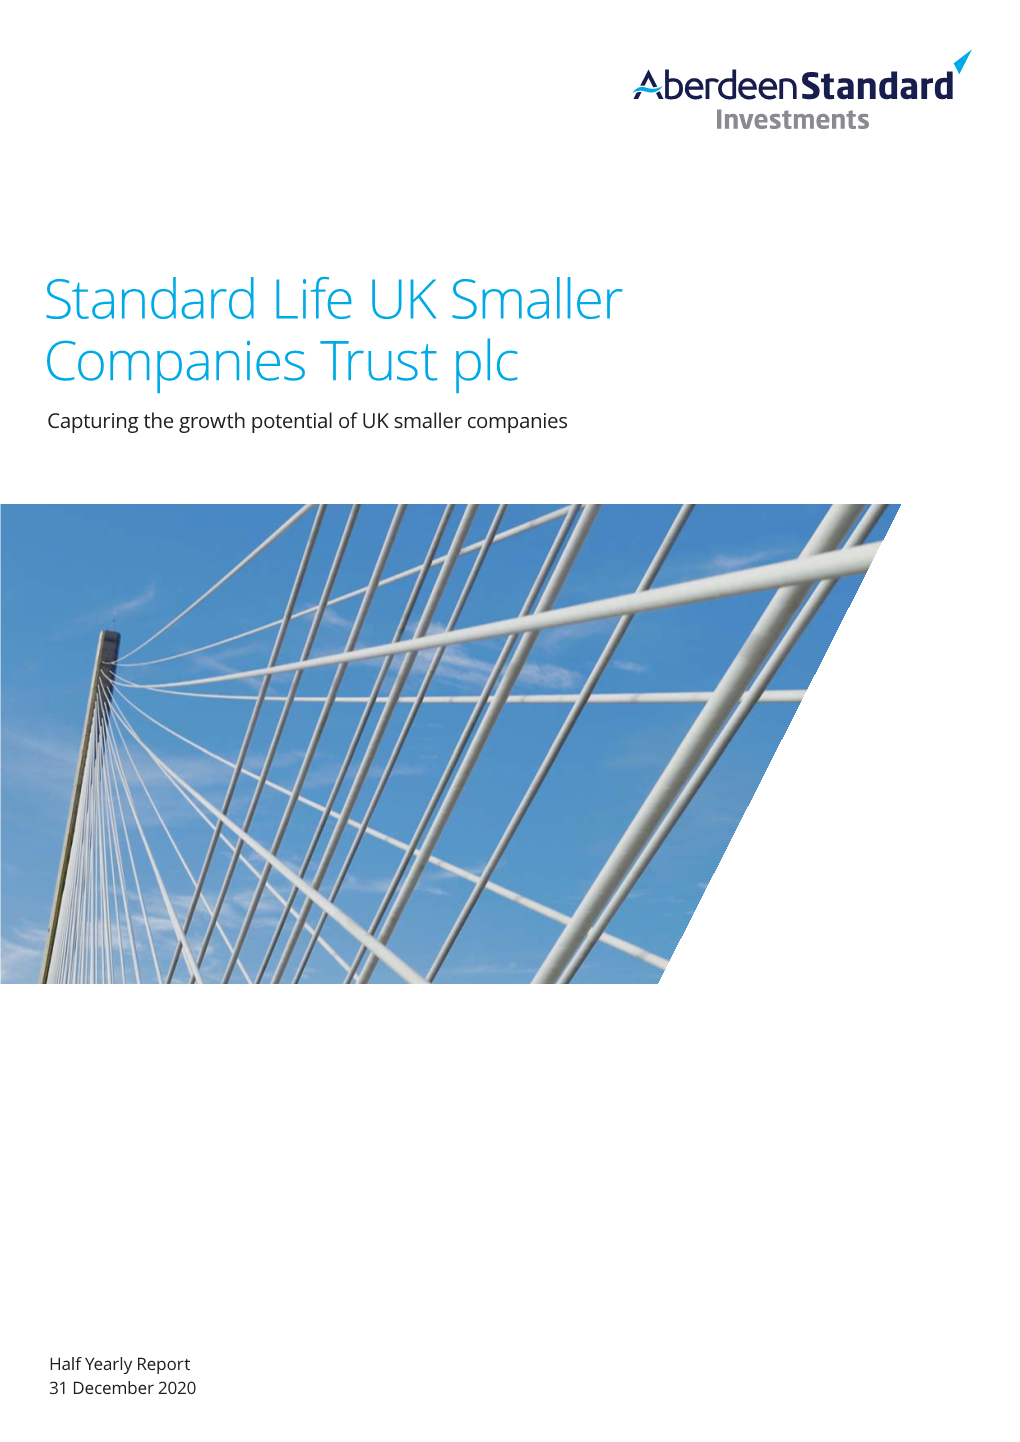 Standard Life UK Smaller Companies Trust Plc Capturing the Growth Potential of UK Smaller Companies